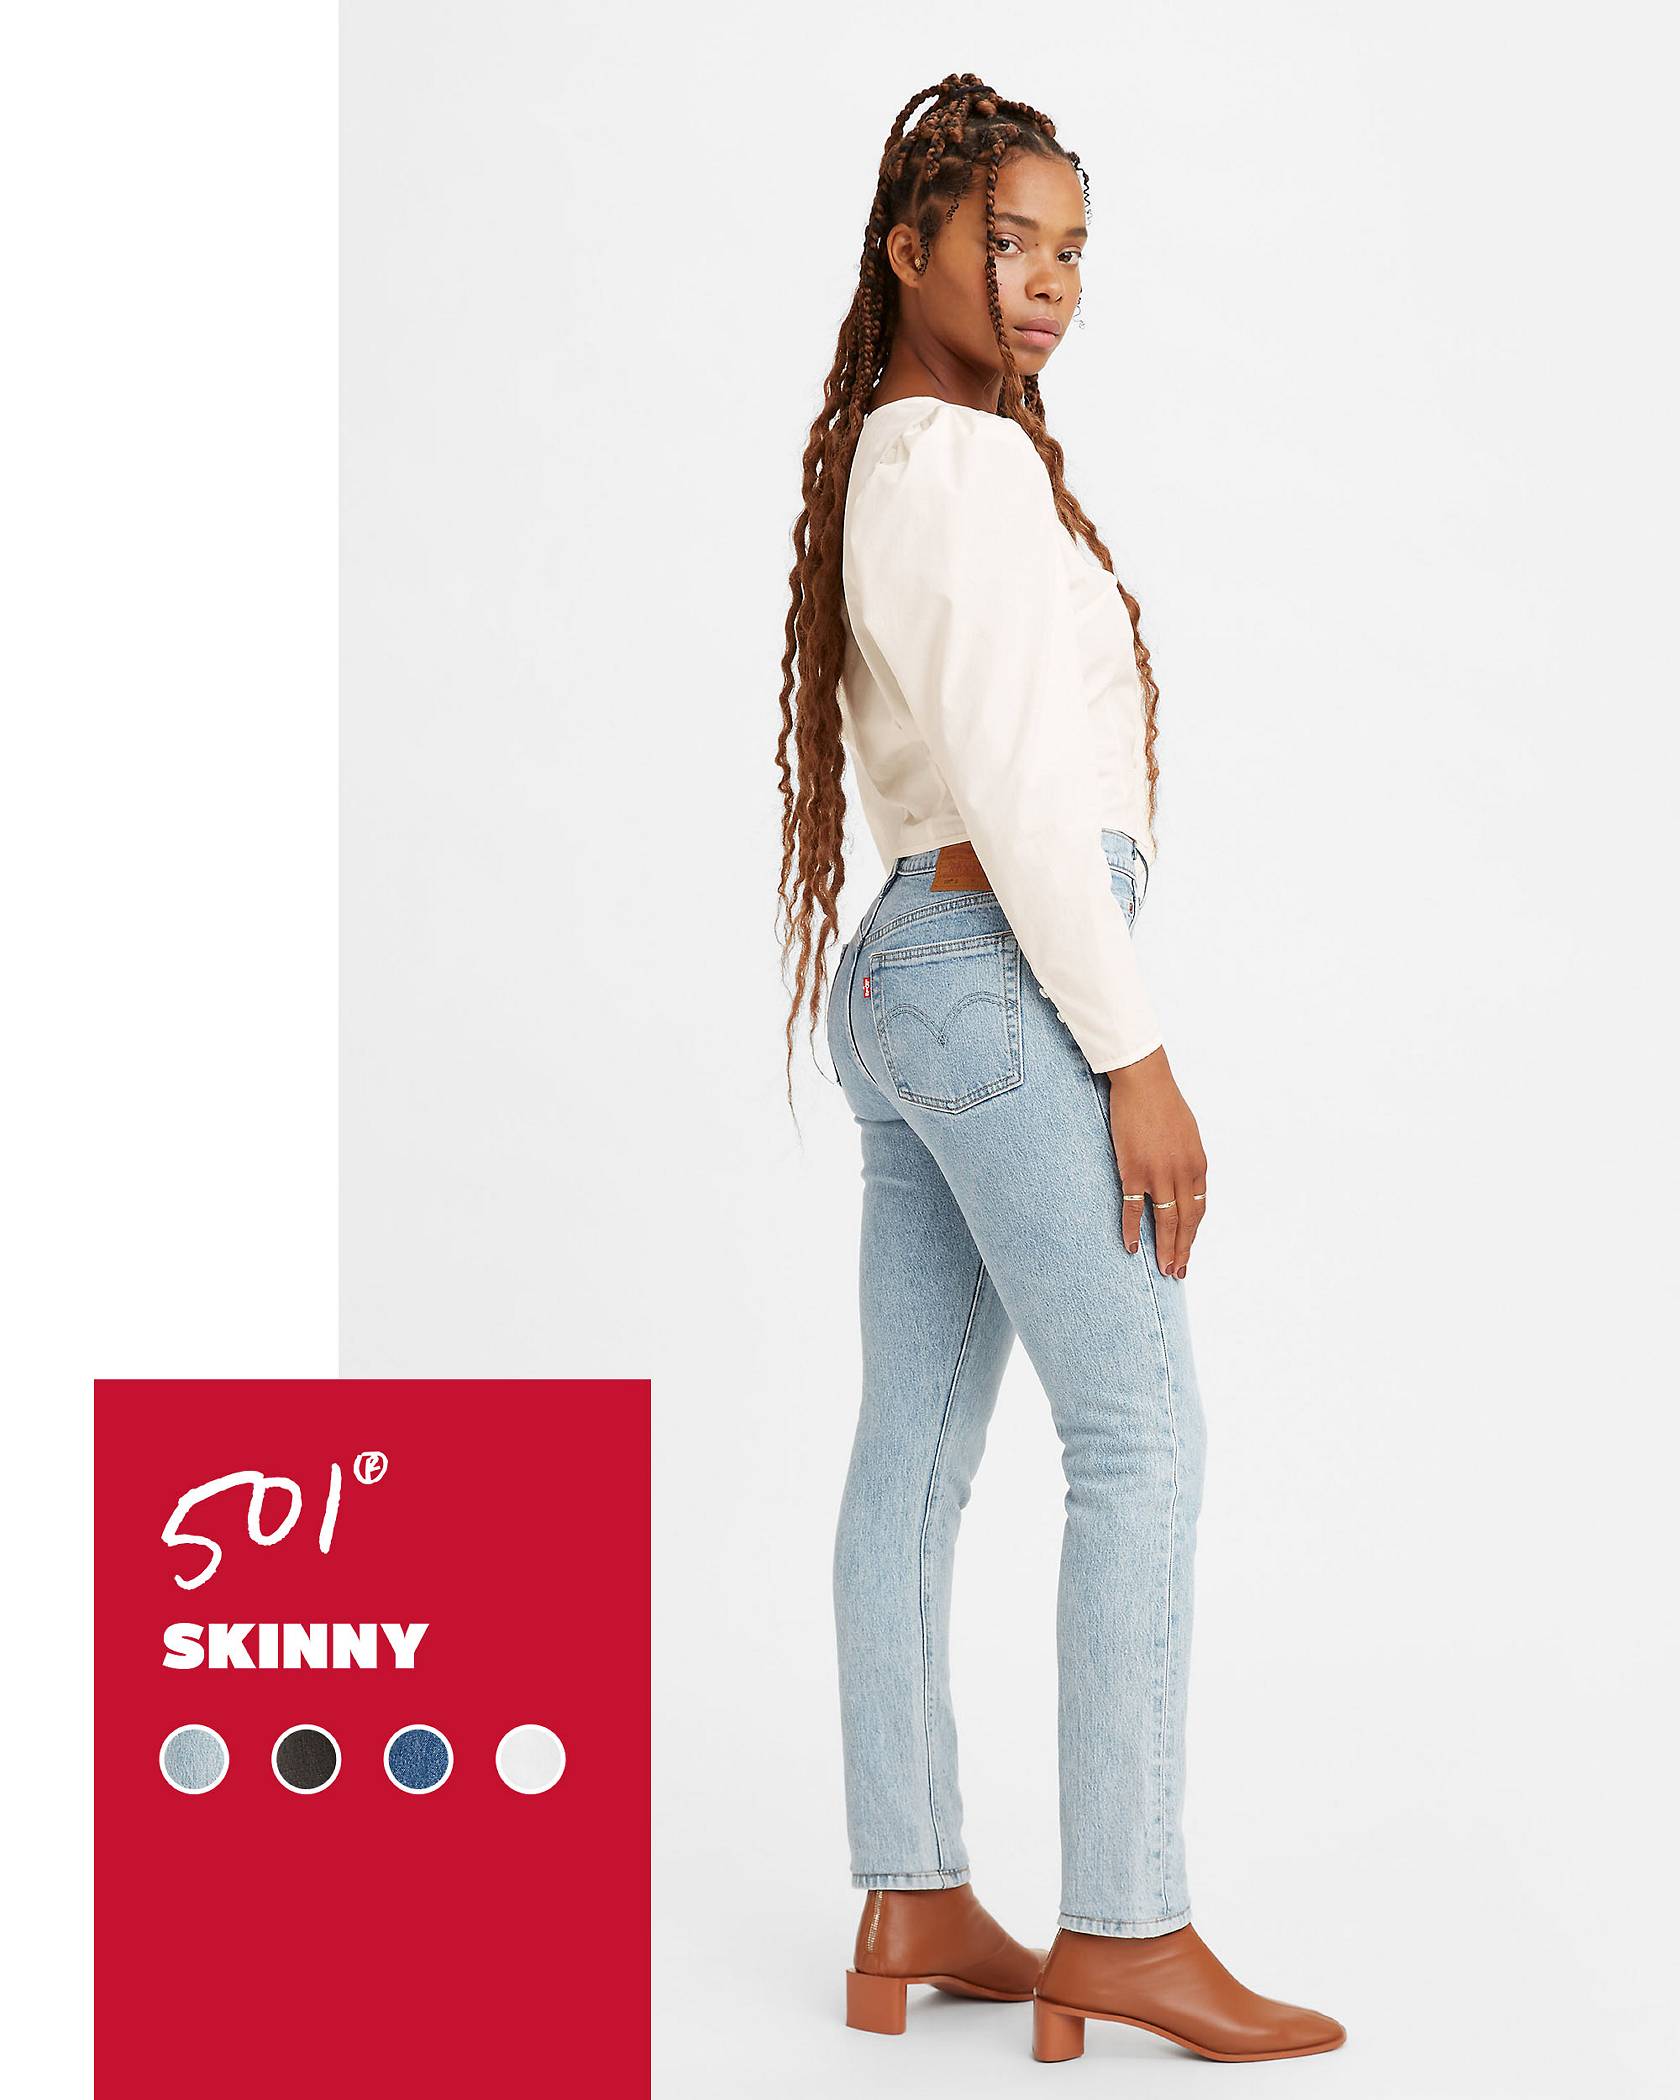 Paneled shot of model in light wash 501® Skinny jeans with a red tag displaying product name and sample color swatches